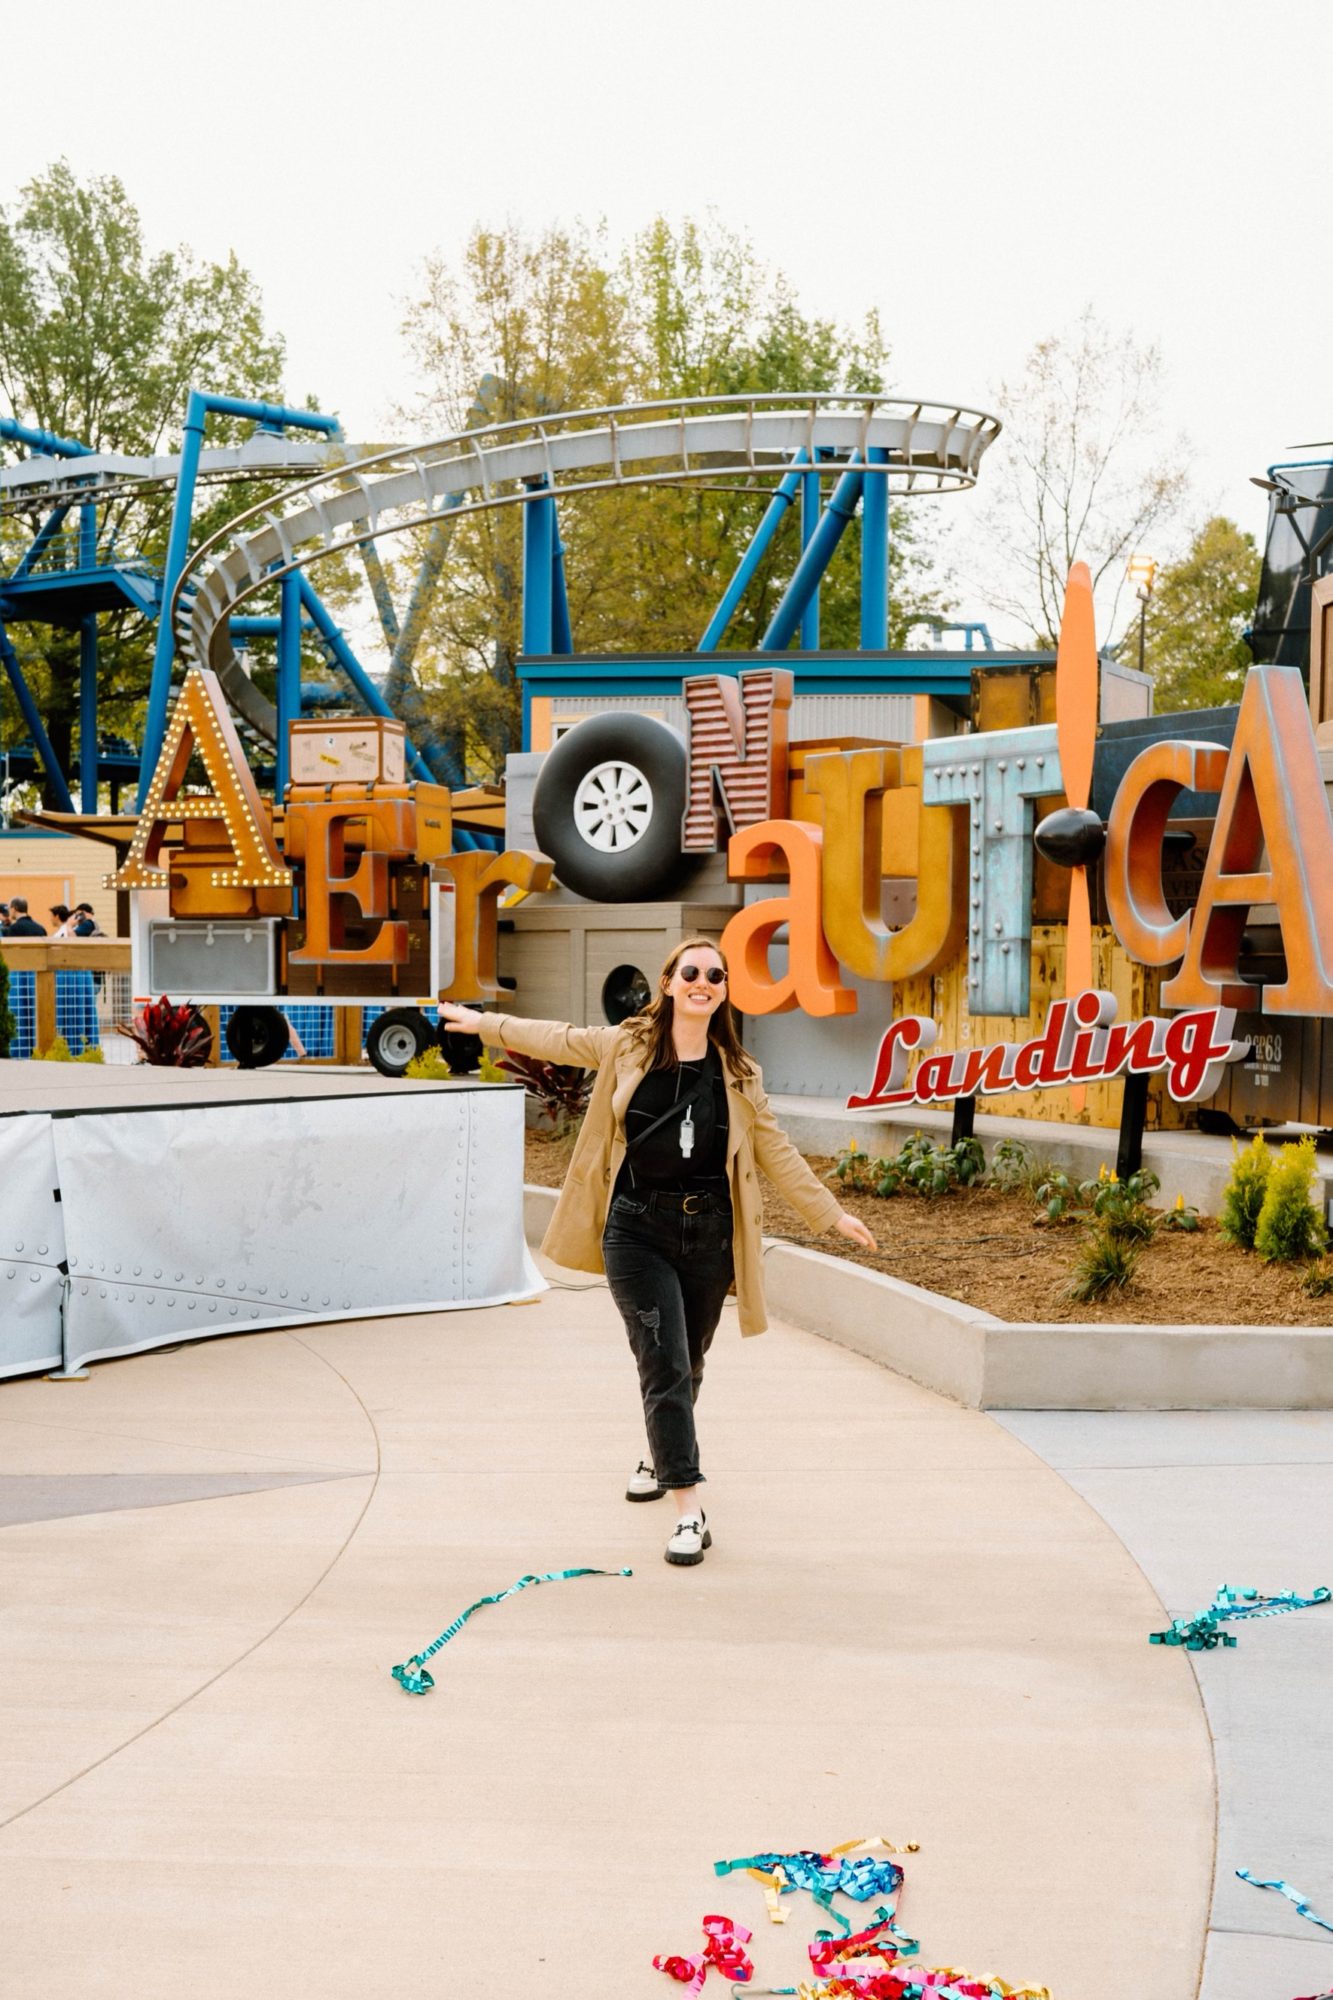 Alyssa stands in front of the Aeronautica Landing sign at Carowinds